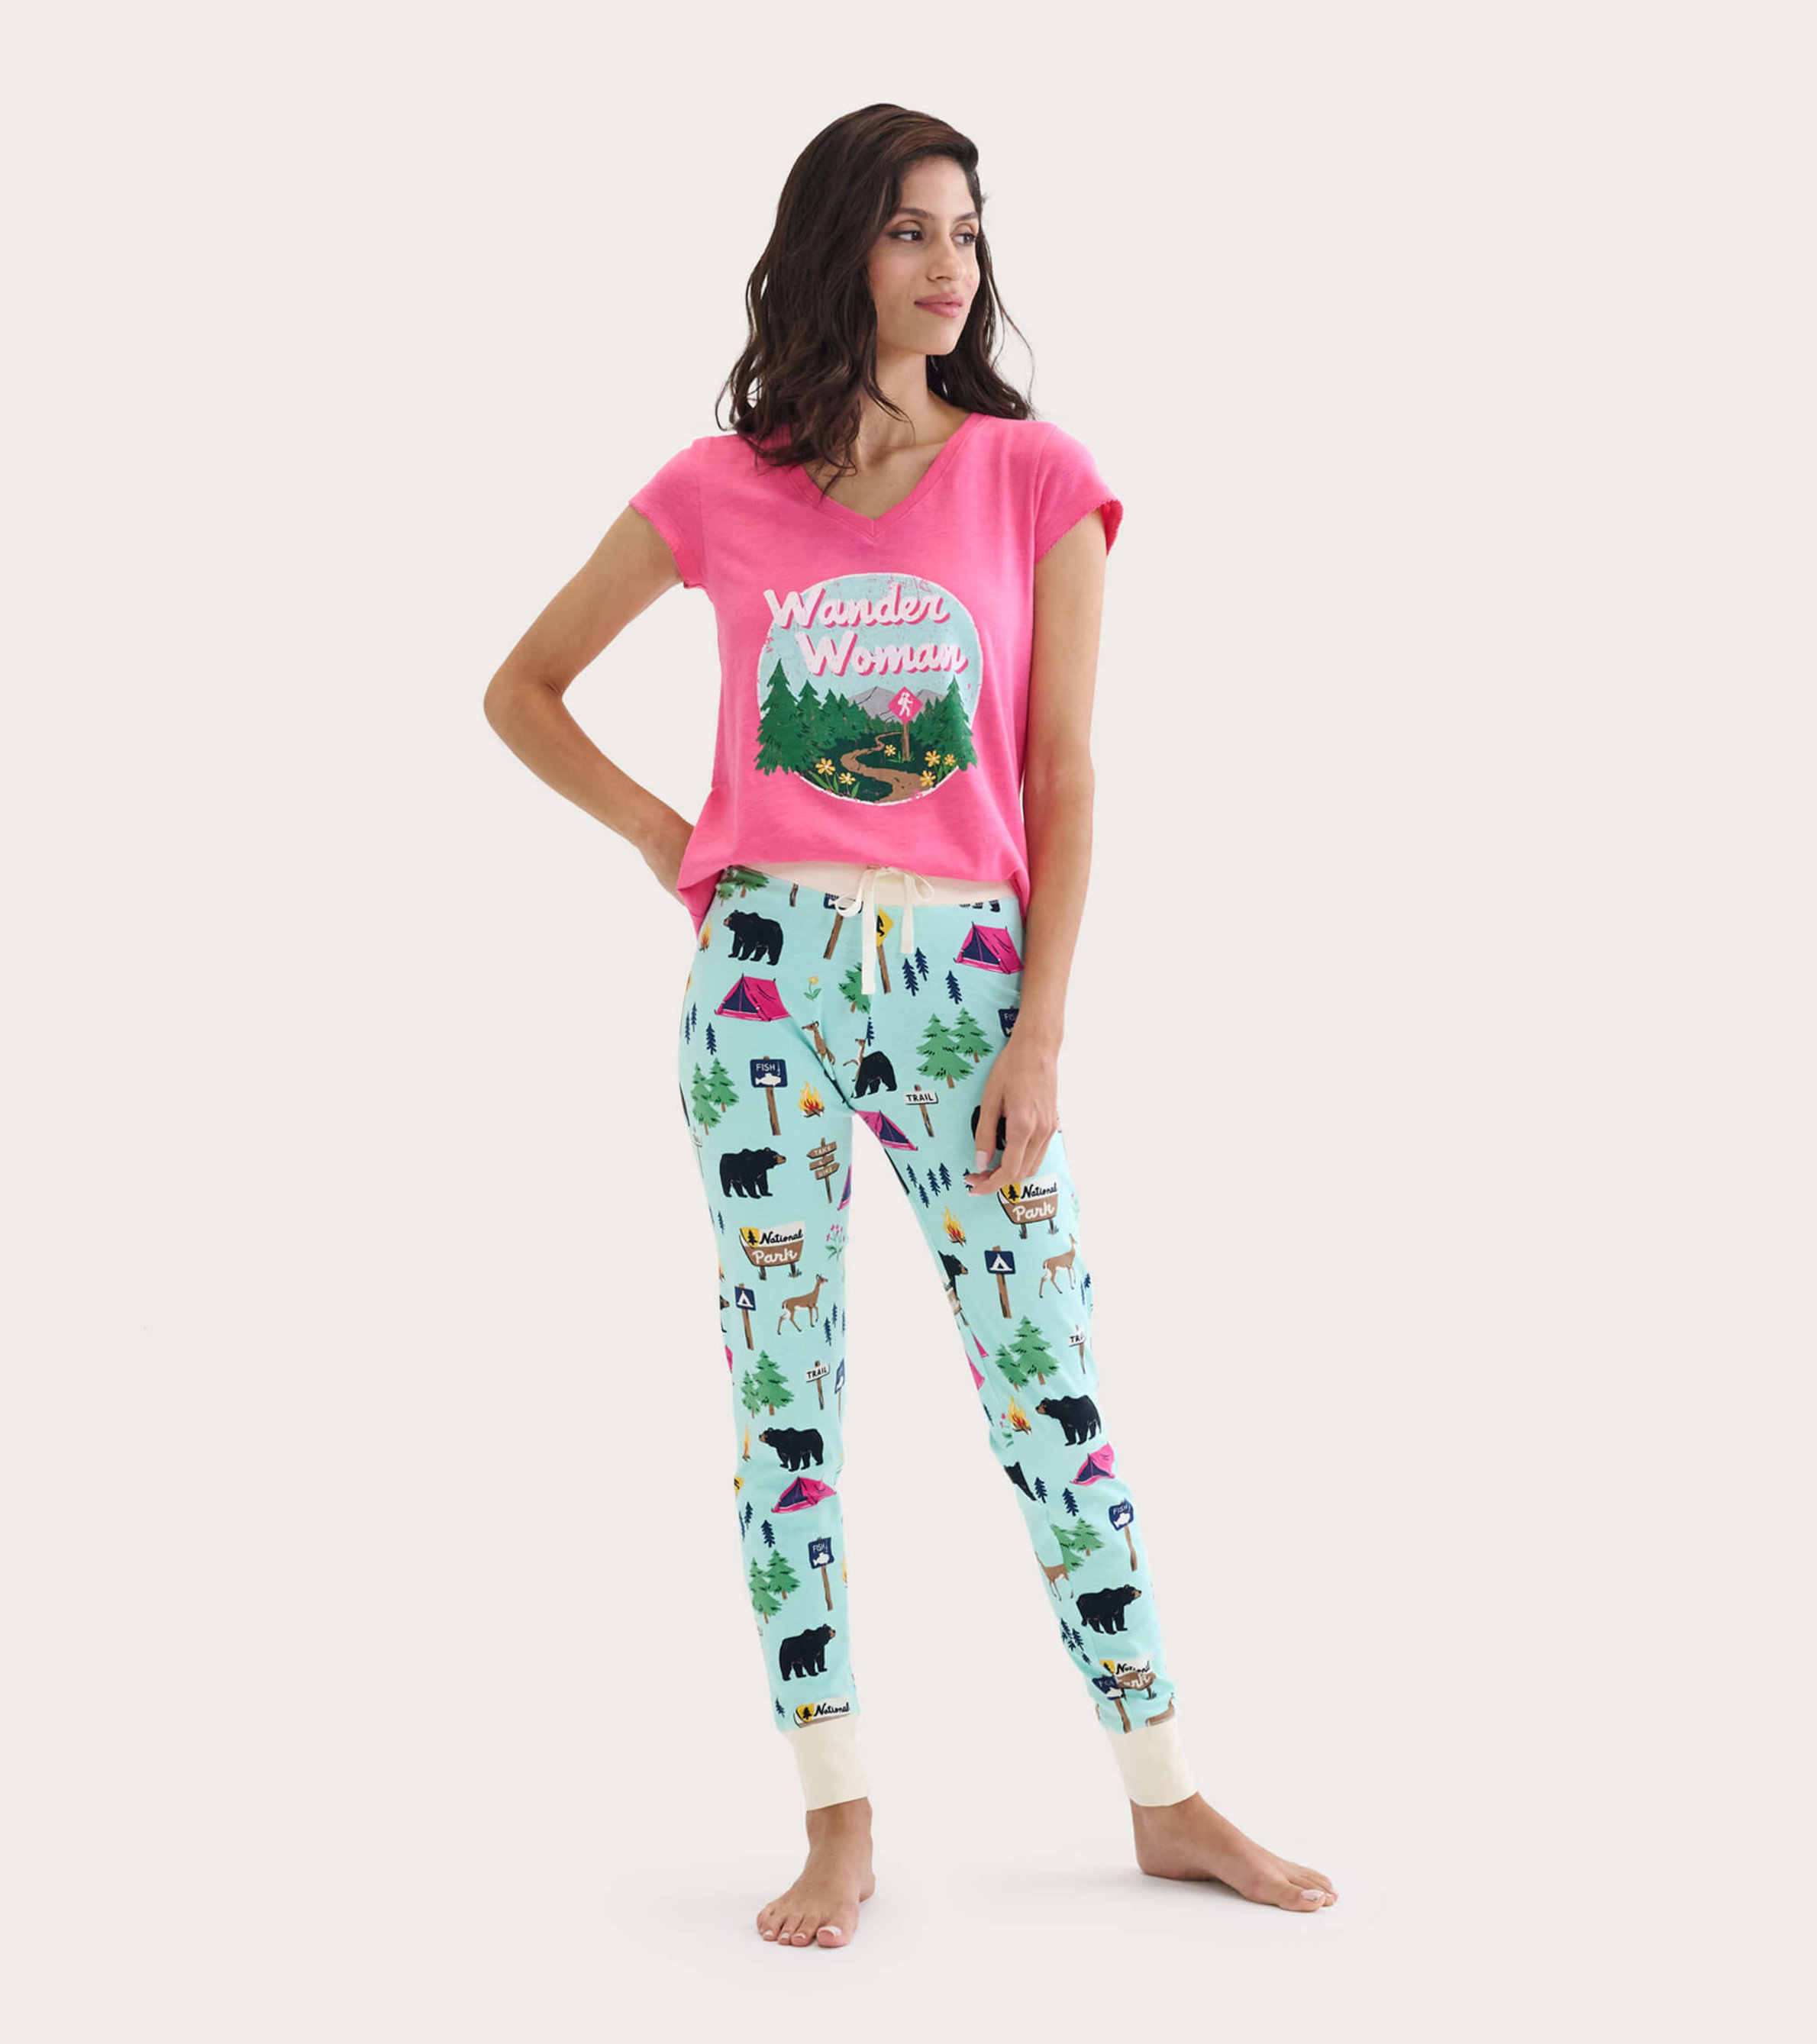 Hiking Trail Women's Tee and Leggings Pajama Separates - Little Blue House  US